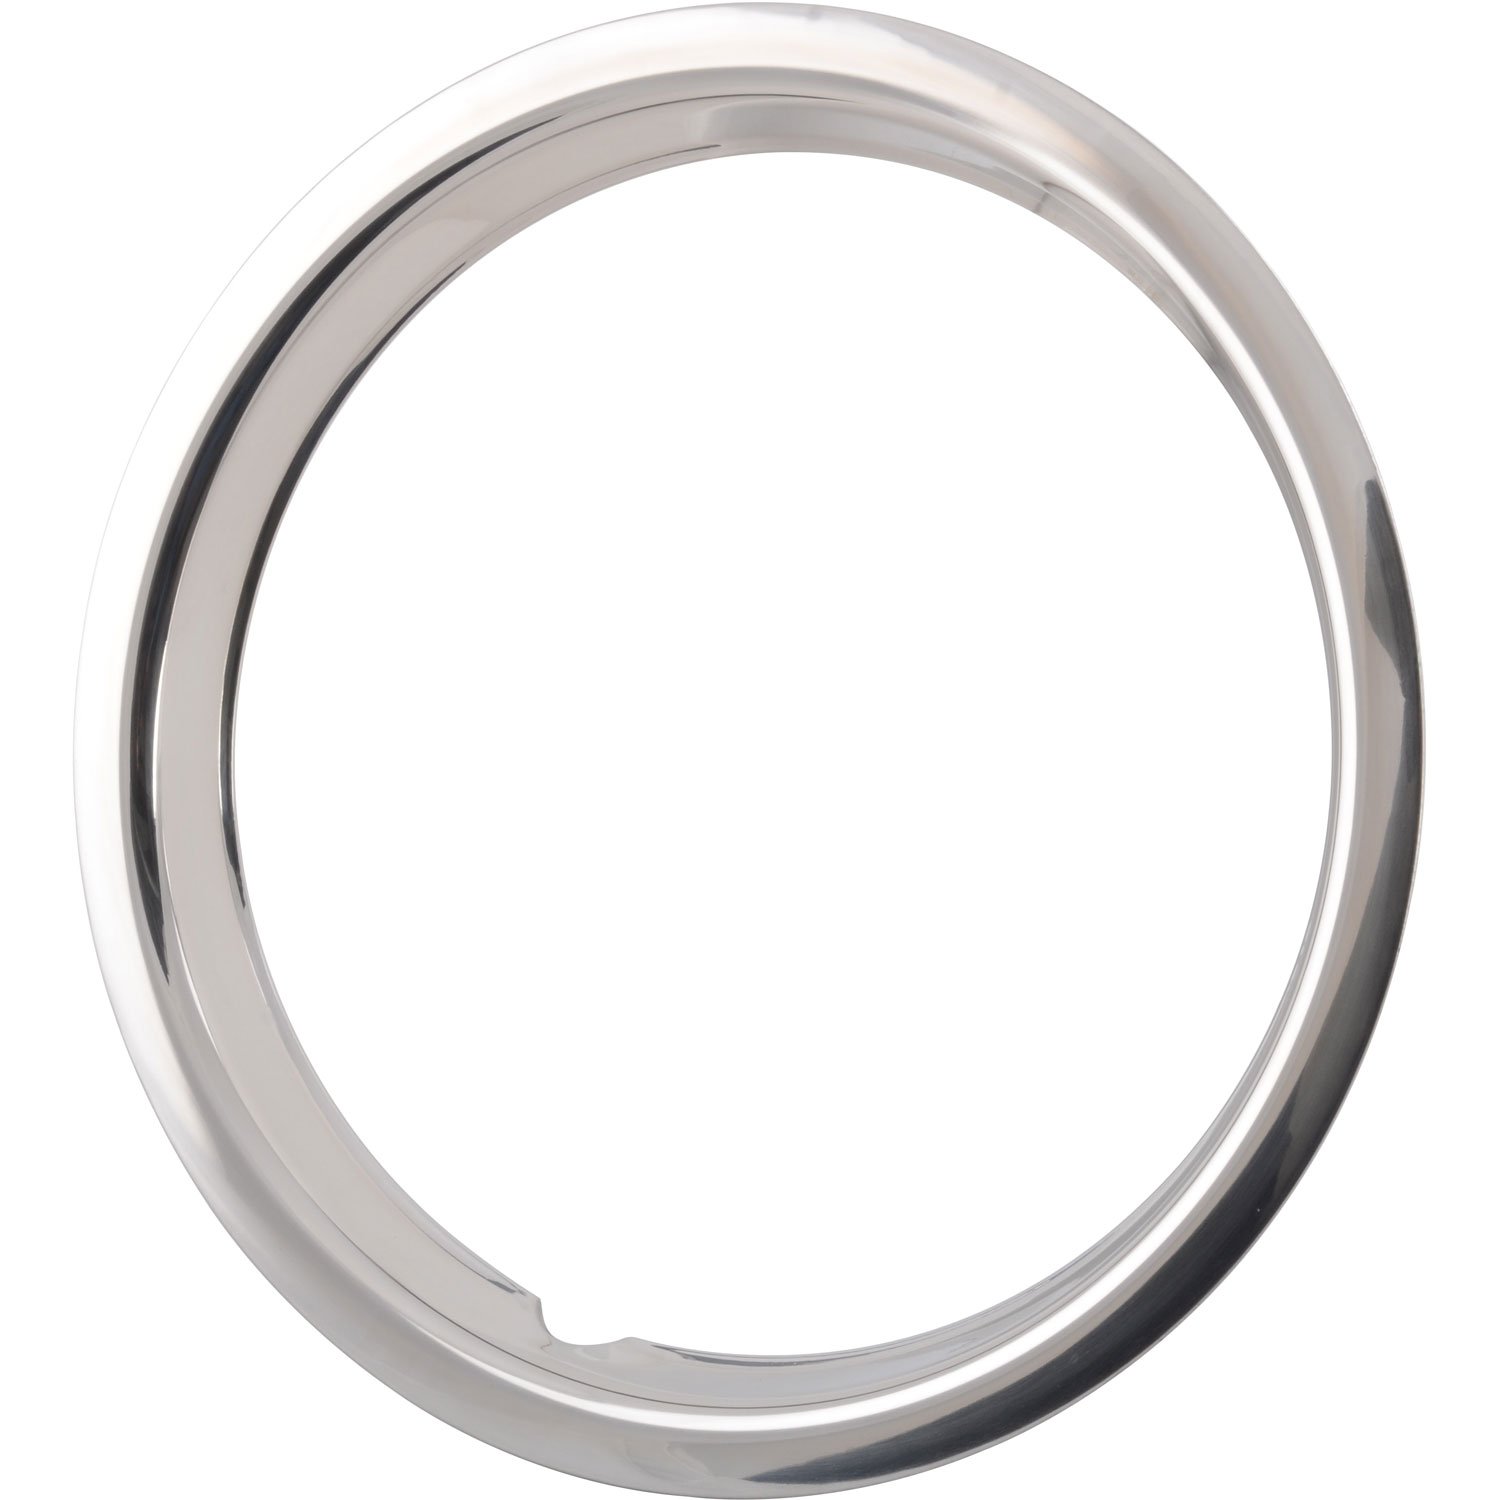 Stainless Steel Trim Ring Fits JEGS 15 in. x 4 in. and 15 in. x 6 in. Rally Wheels